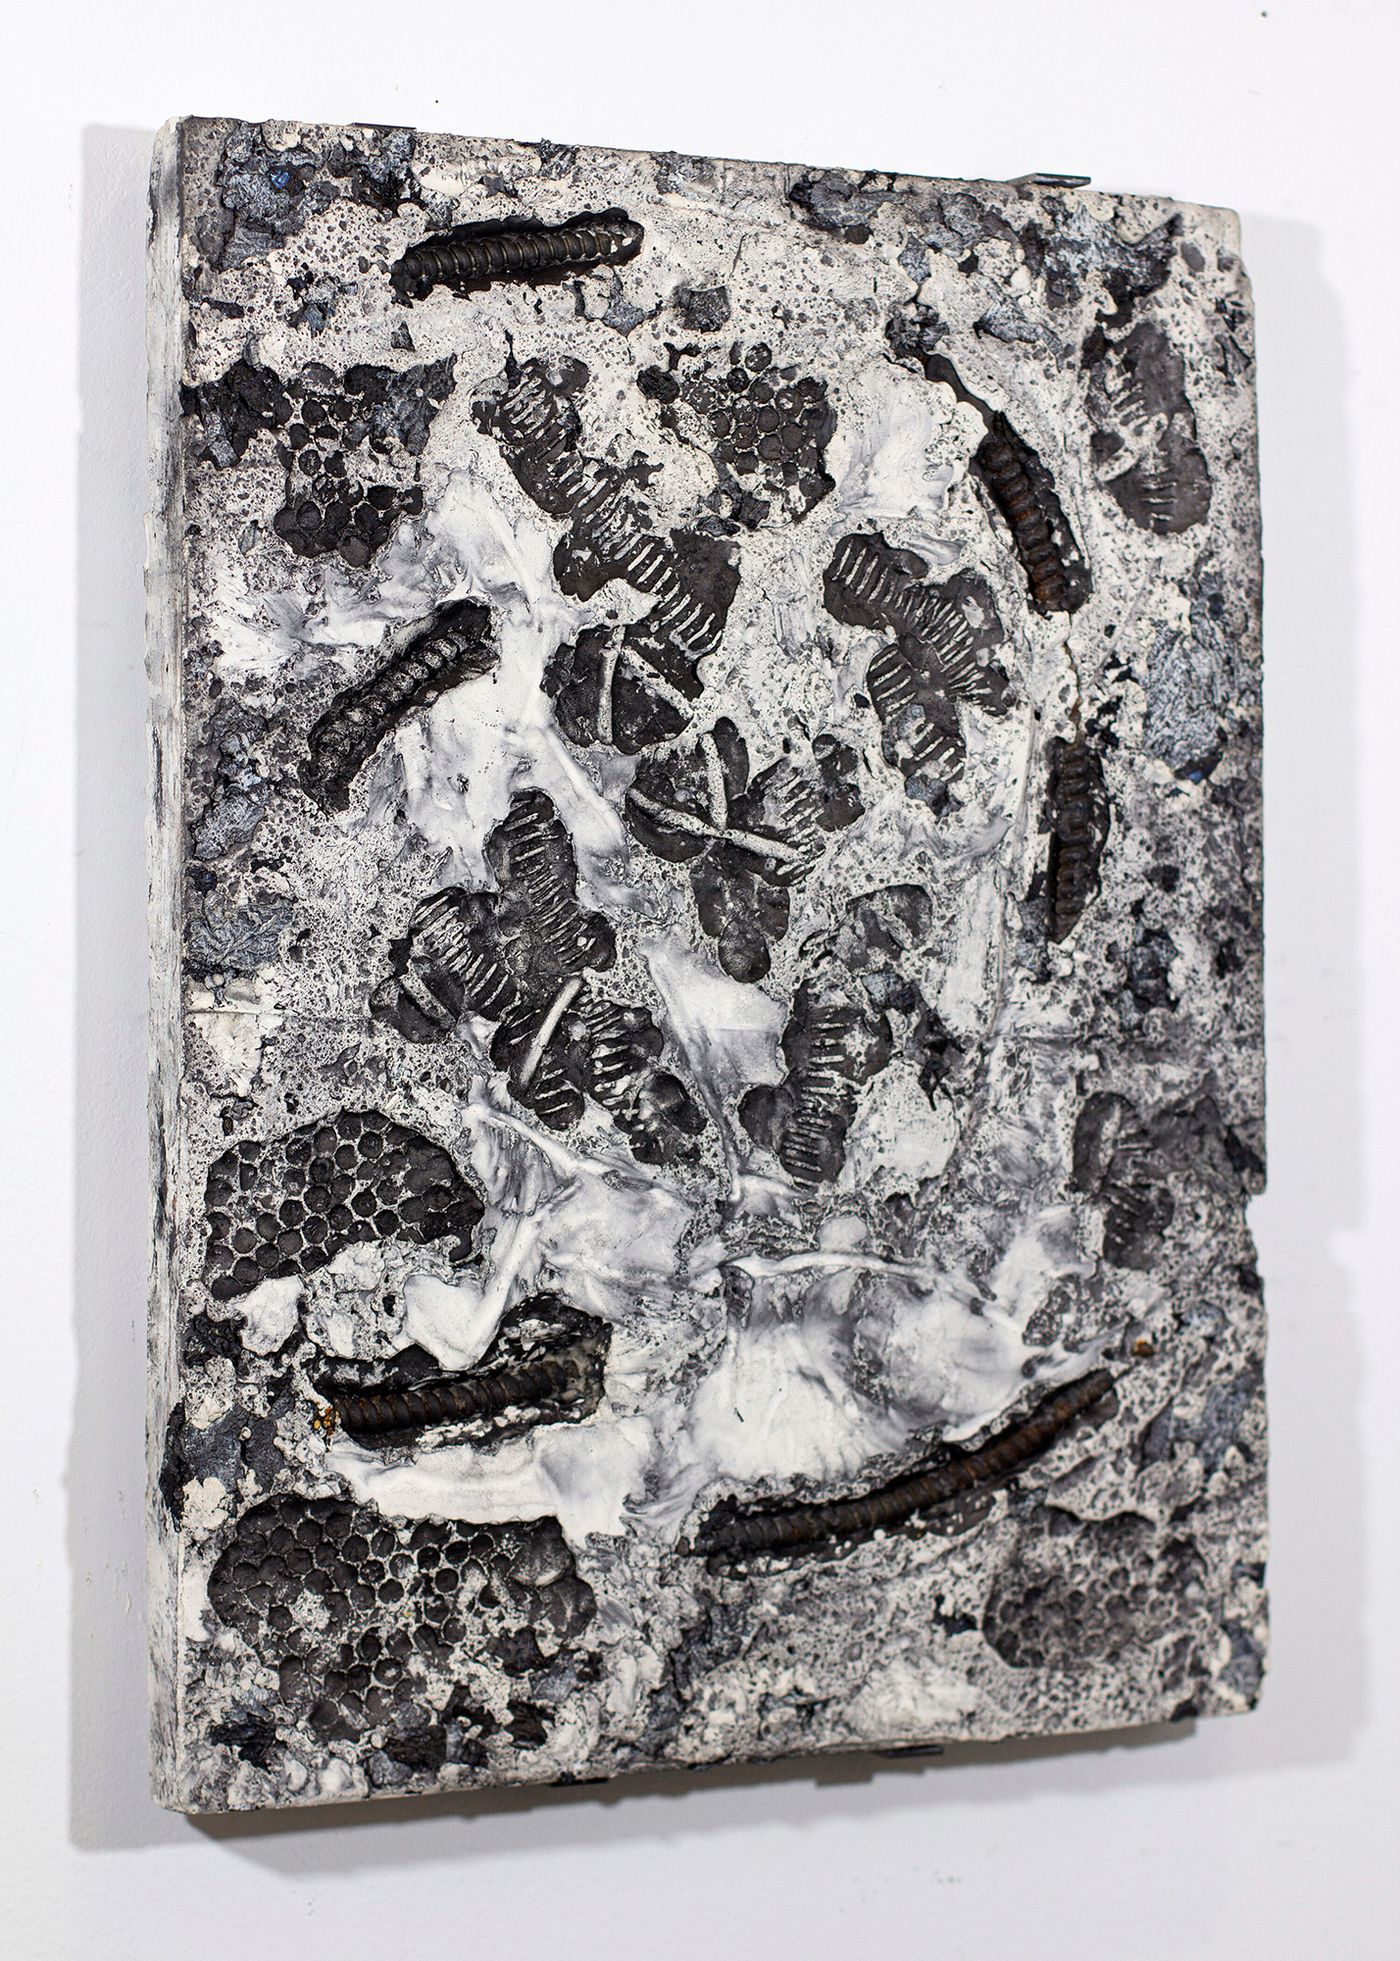 Fossil III, 2022. Oil paint fragments, clay, steel, shells, hadrosaur fossils and graphite dust casted into plaster; 24 x 18 in. Photo courtesy the artist.